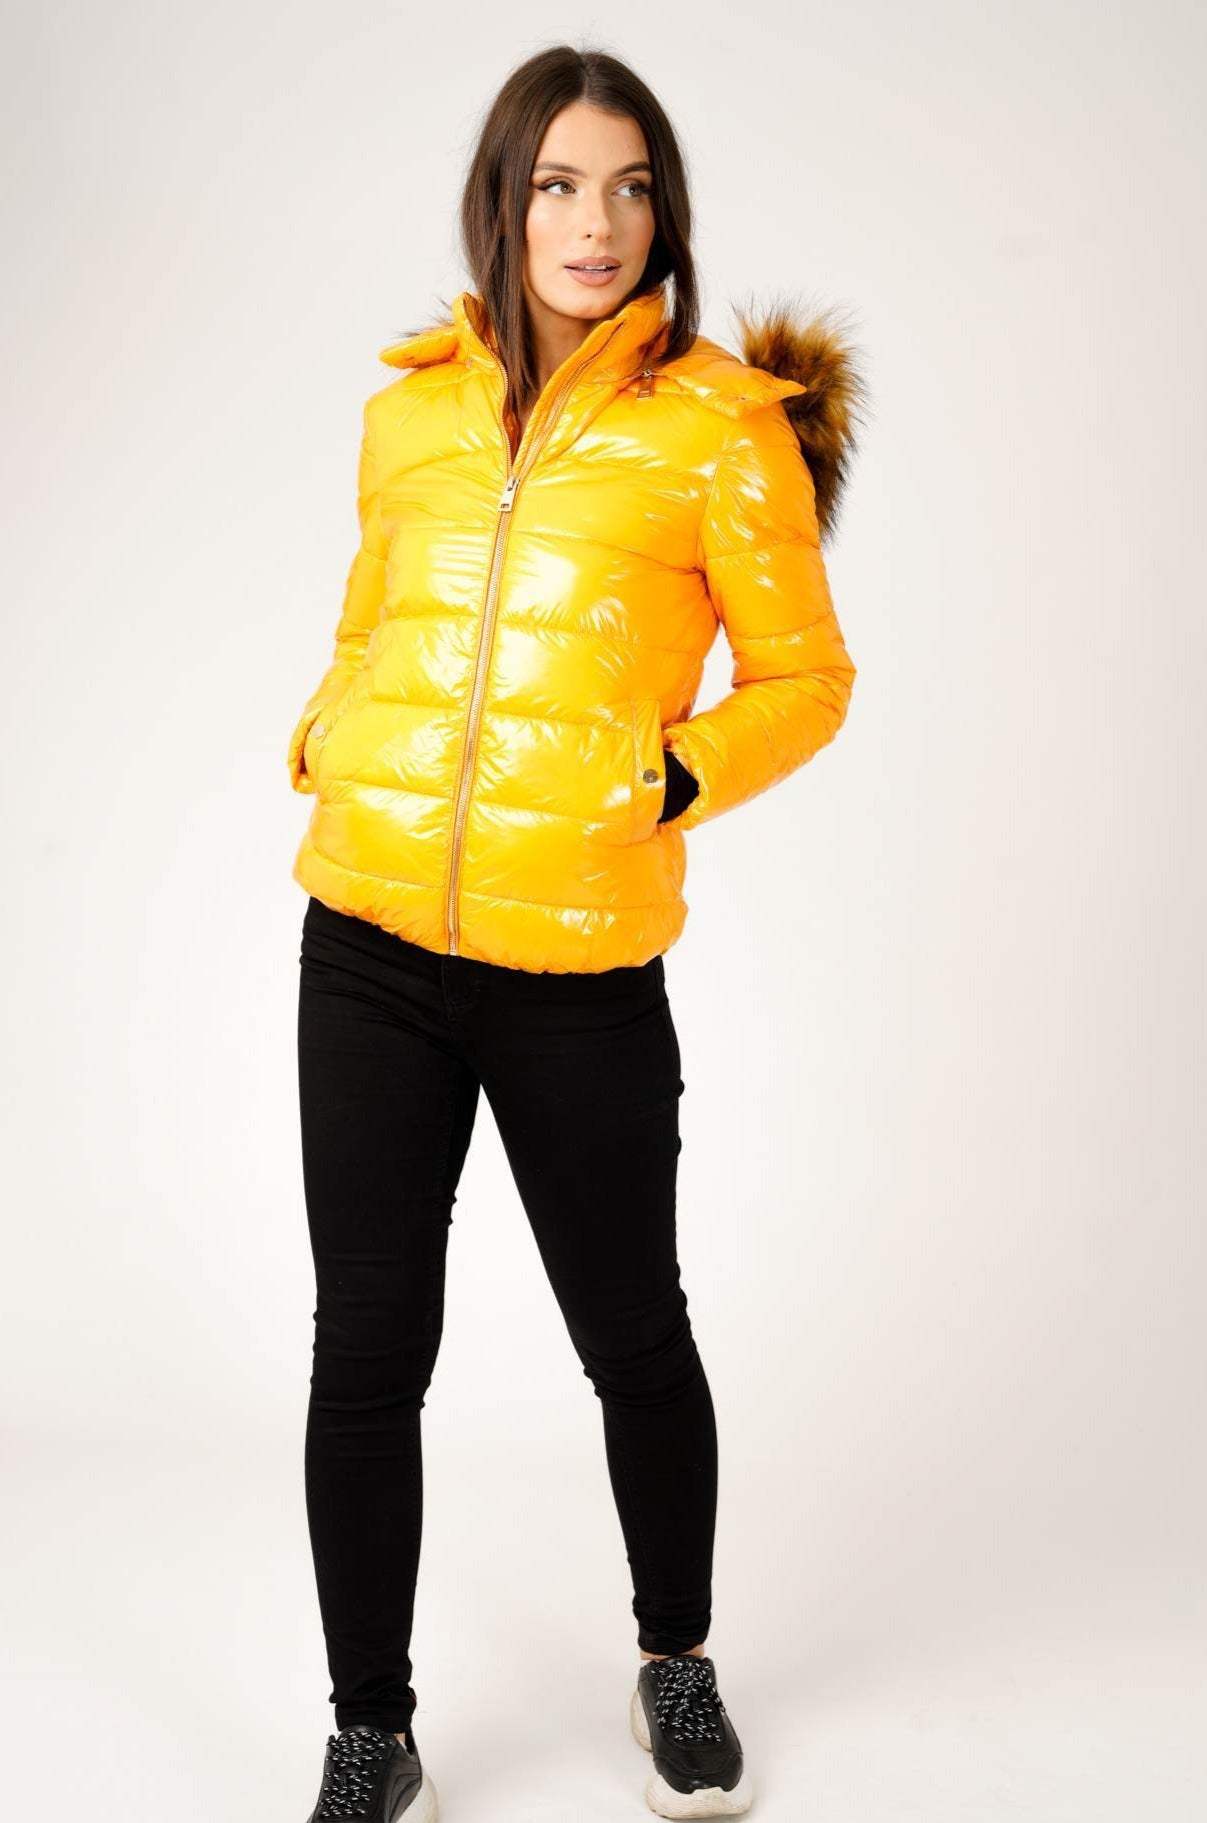 Love Sunshine Wet Look Padded Jacket with Faux Fur Hood in Shiny Mustard LS-6042